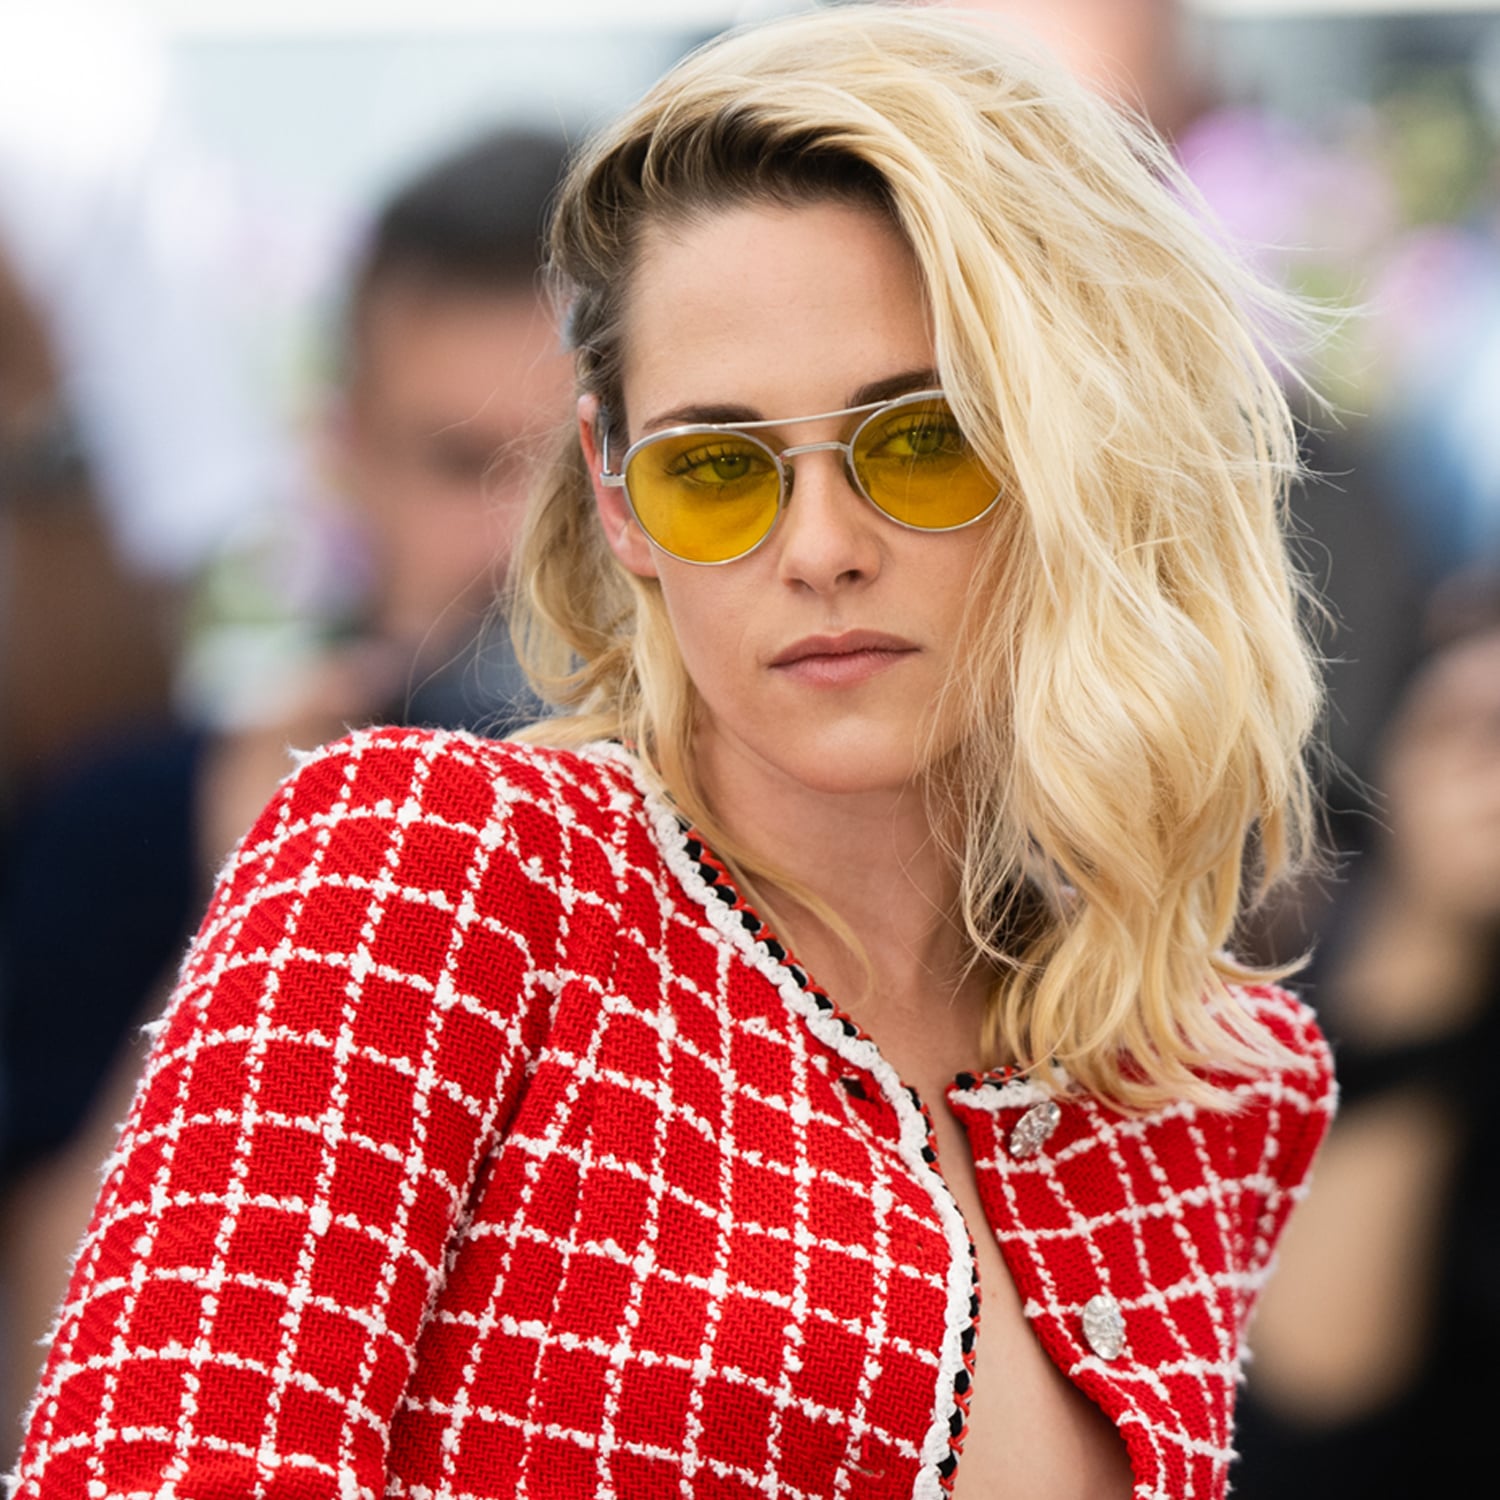 Kristen Stewart Outfits at the Cannes Film Festival, Photos